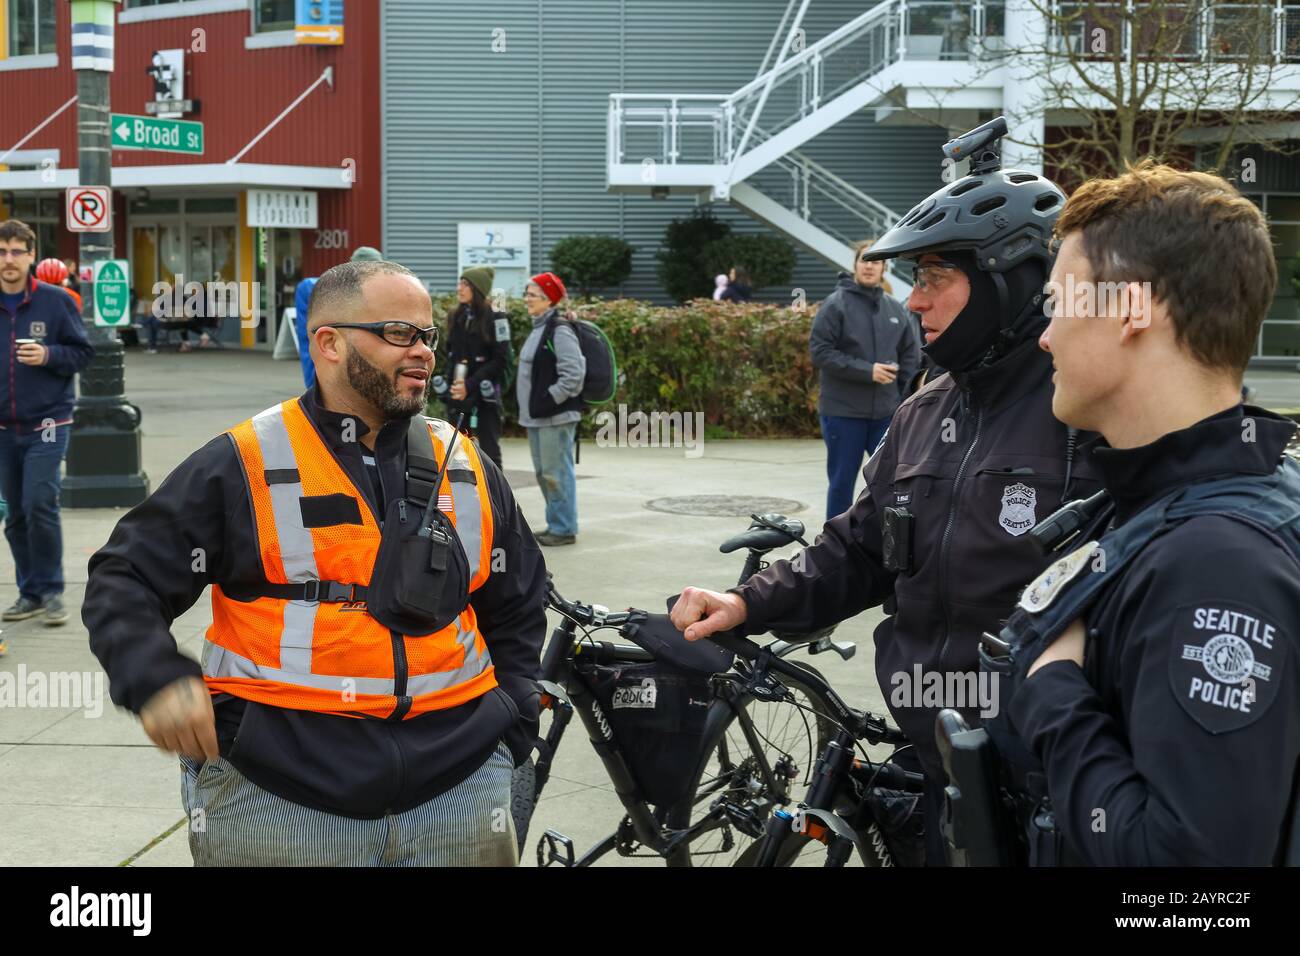 SEATTLE - FEBRUARY 16: A BNSF Railway engineer whose train was blocked by protesters speaks with Seattle Police. Stock Photo